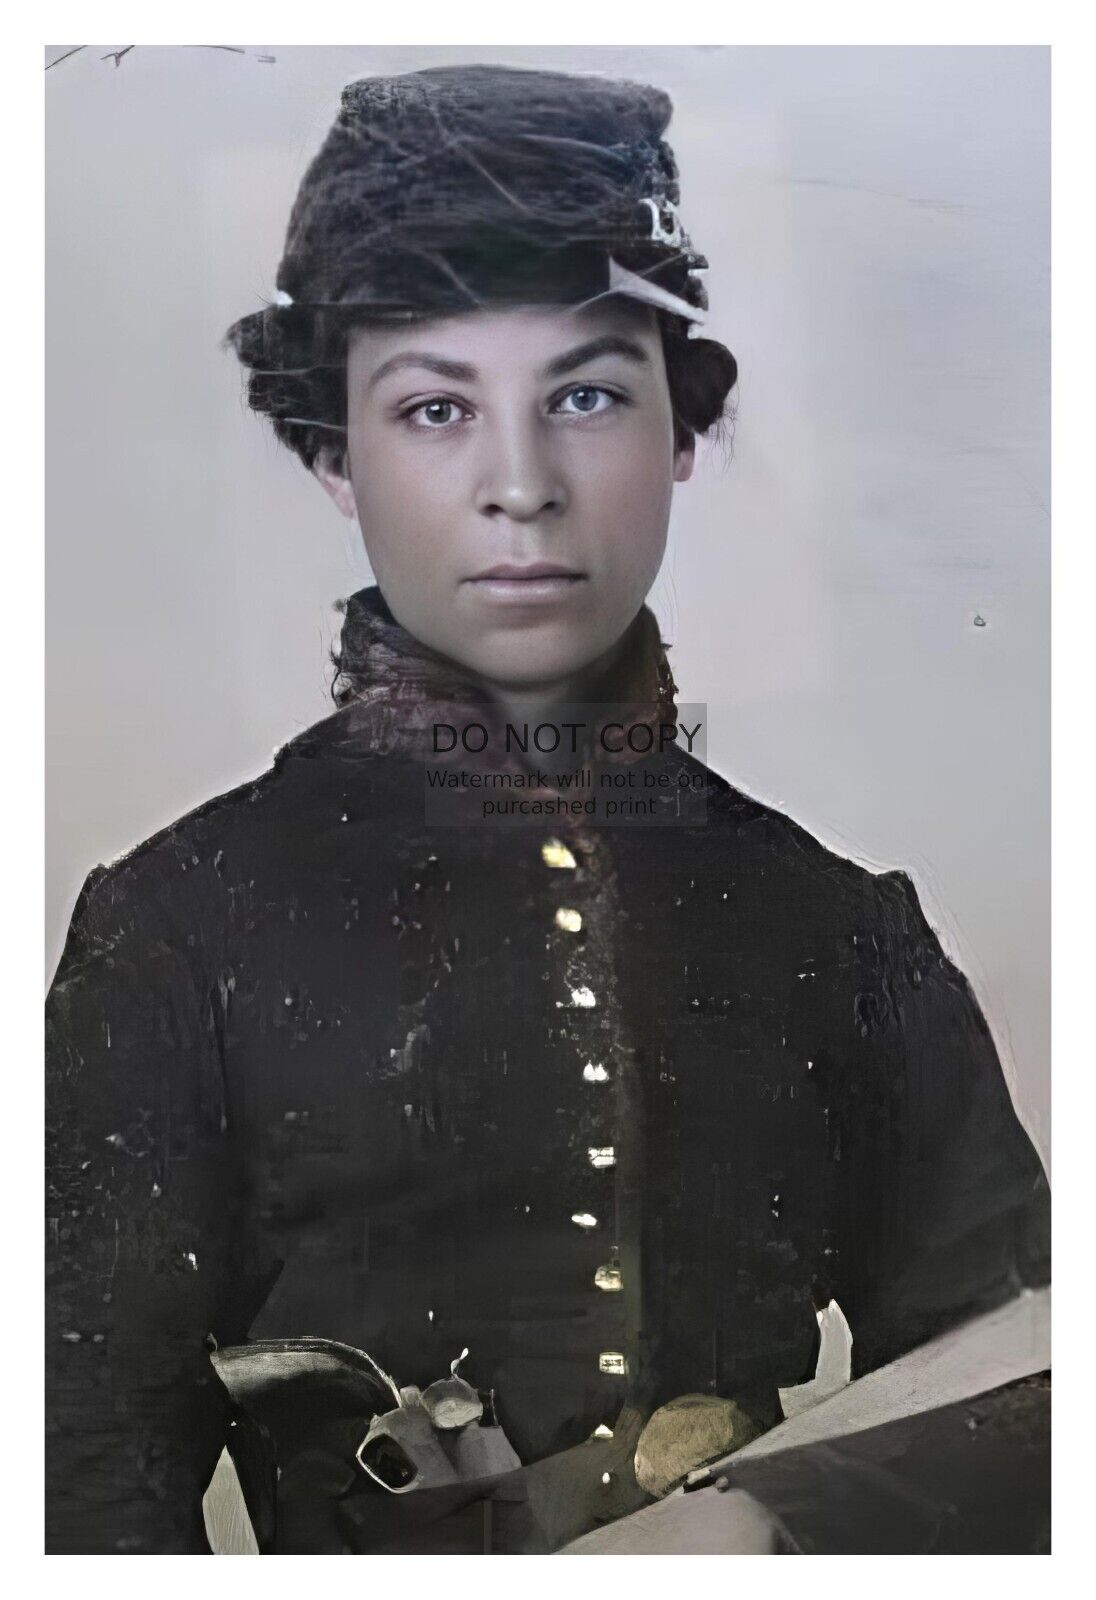 CATHAY WILLIAMS ONLY FEMALE BUFFALO SOLDIER UNION CIVIL WAR 4X6 COLORIZED PHOTO